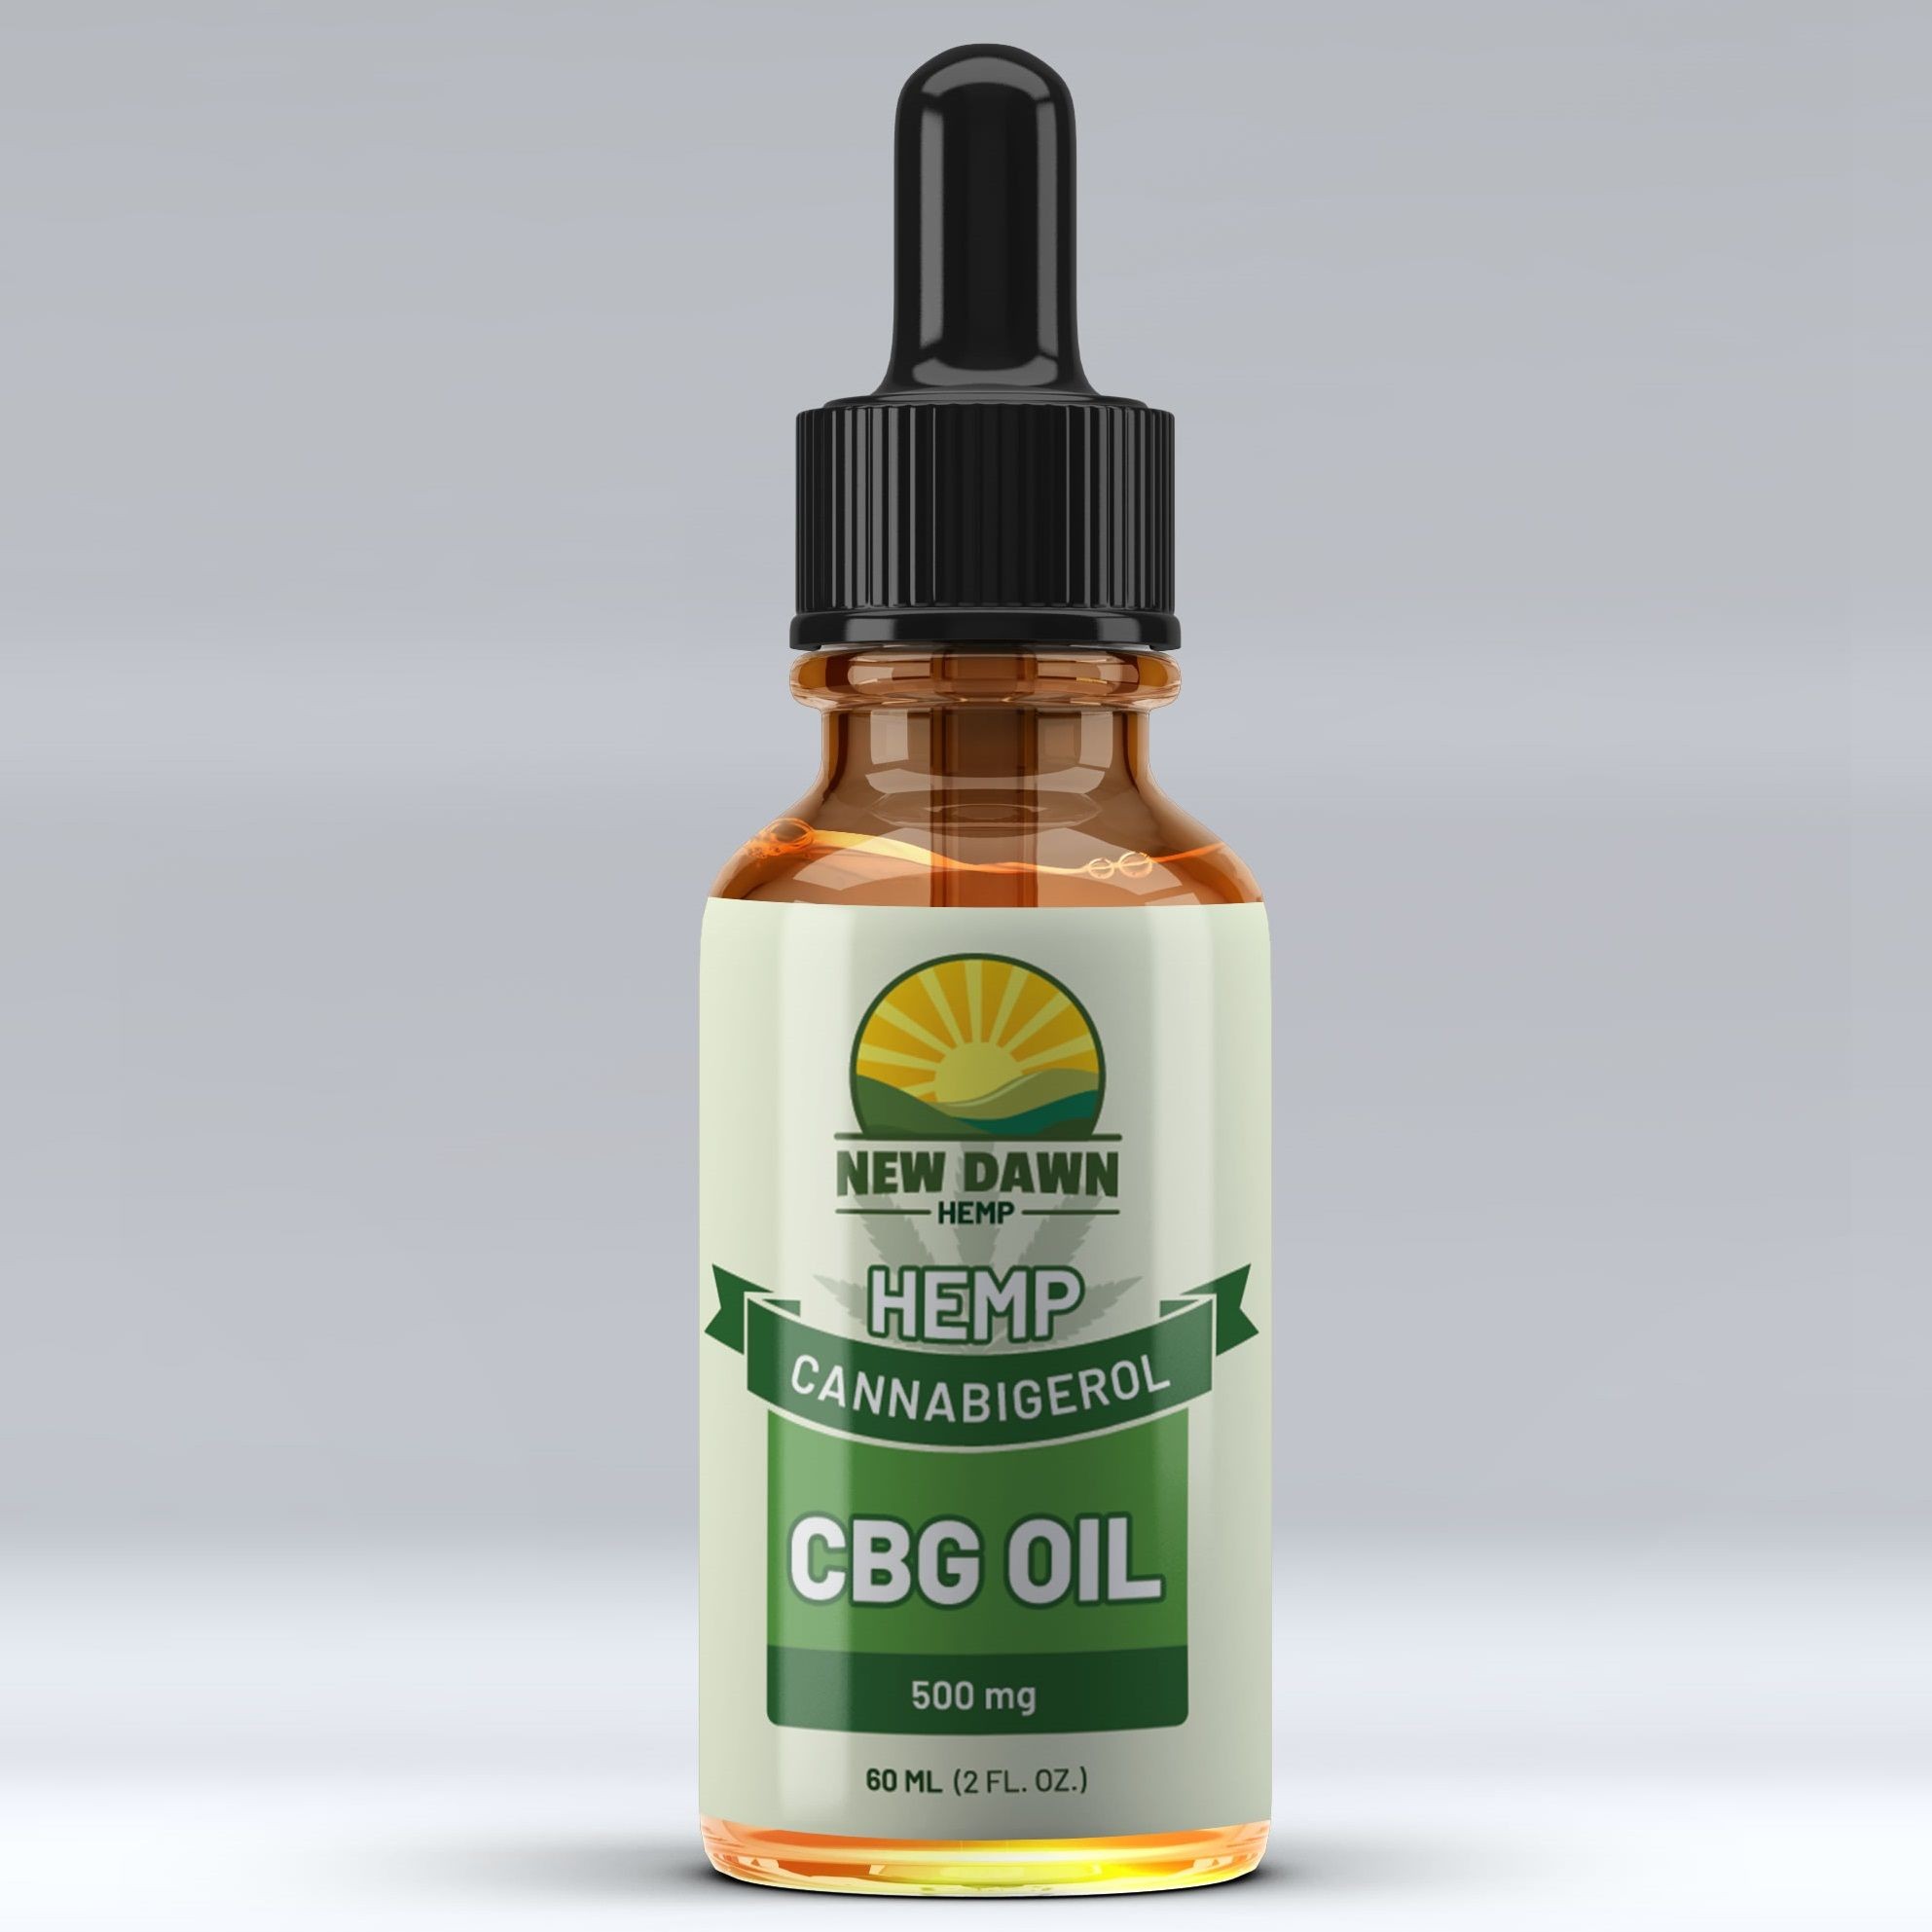 Cbg Products Near Me - Cbg|Gummies|Cbd|Effects|Thc|Cannabinoid|Hemp|Cannabinoids|Image|Products|Courtesy|Product|Way|Benefits|Dosage|Everyone|Oil|People|Spectrum|Others|Gummy|Time|Dosages|Advantages|Cannabis|Results|Treatment|Body|Stomach|Tincture|Pain|Drug|Approach|Isolate|Side|Dog|Ingredients|List|State|Cannabigerol|Cbg Gummies|Psychoactive Effects|Full Spectrum Gummies|Image Courtesy|Full-Spectrum Cbd Products|Different Dosages|Right Dosage|Empty Stomach|Cbd Gummies|Cbd Isolate|Side Effects|Different Effects|Dog Cbg Gummies|Drug Test|Full-Spectrum Cbd Product|Few Things|Chronic Pain|Full-Spectrum Cbd|Psychotropic Effects|Final Thoughts|Right Dosage Everyone|Final Tips|Same Results|Cbg Ratio|Appetite Loss|Powerful Hunger Stimulant|Whereas Cbd|Thc Ratio Gummies|Dangerous Consequence|Numerous Diseases